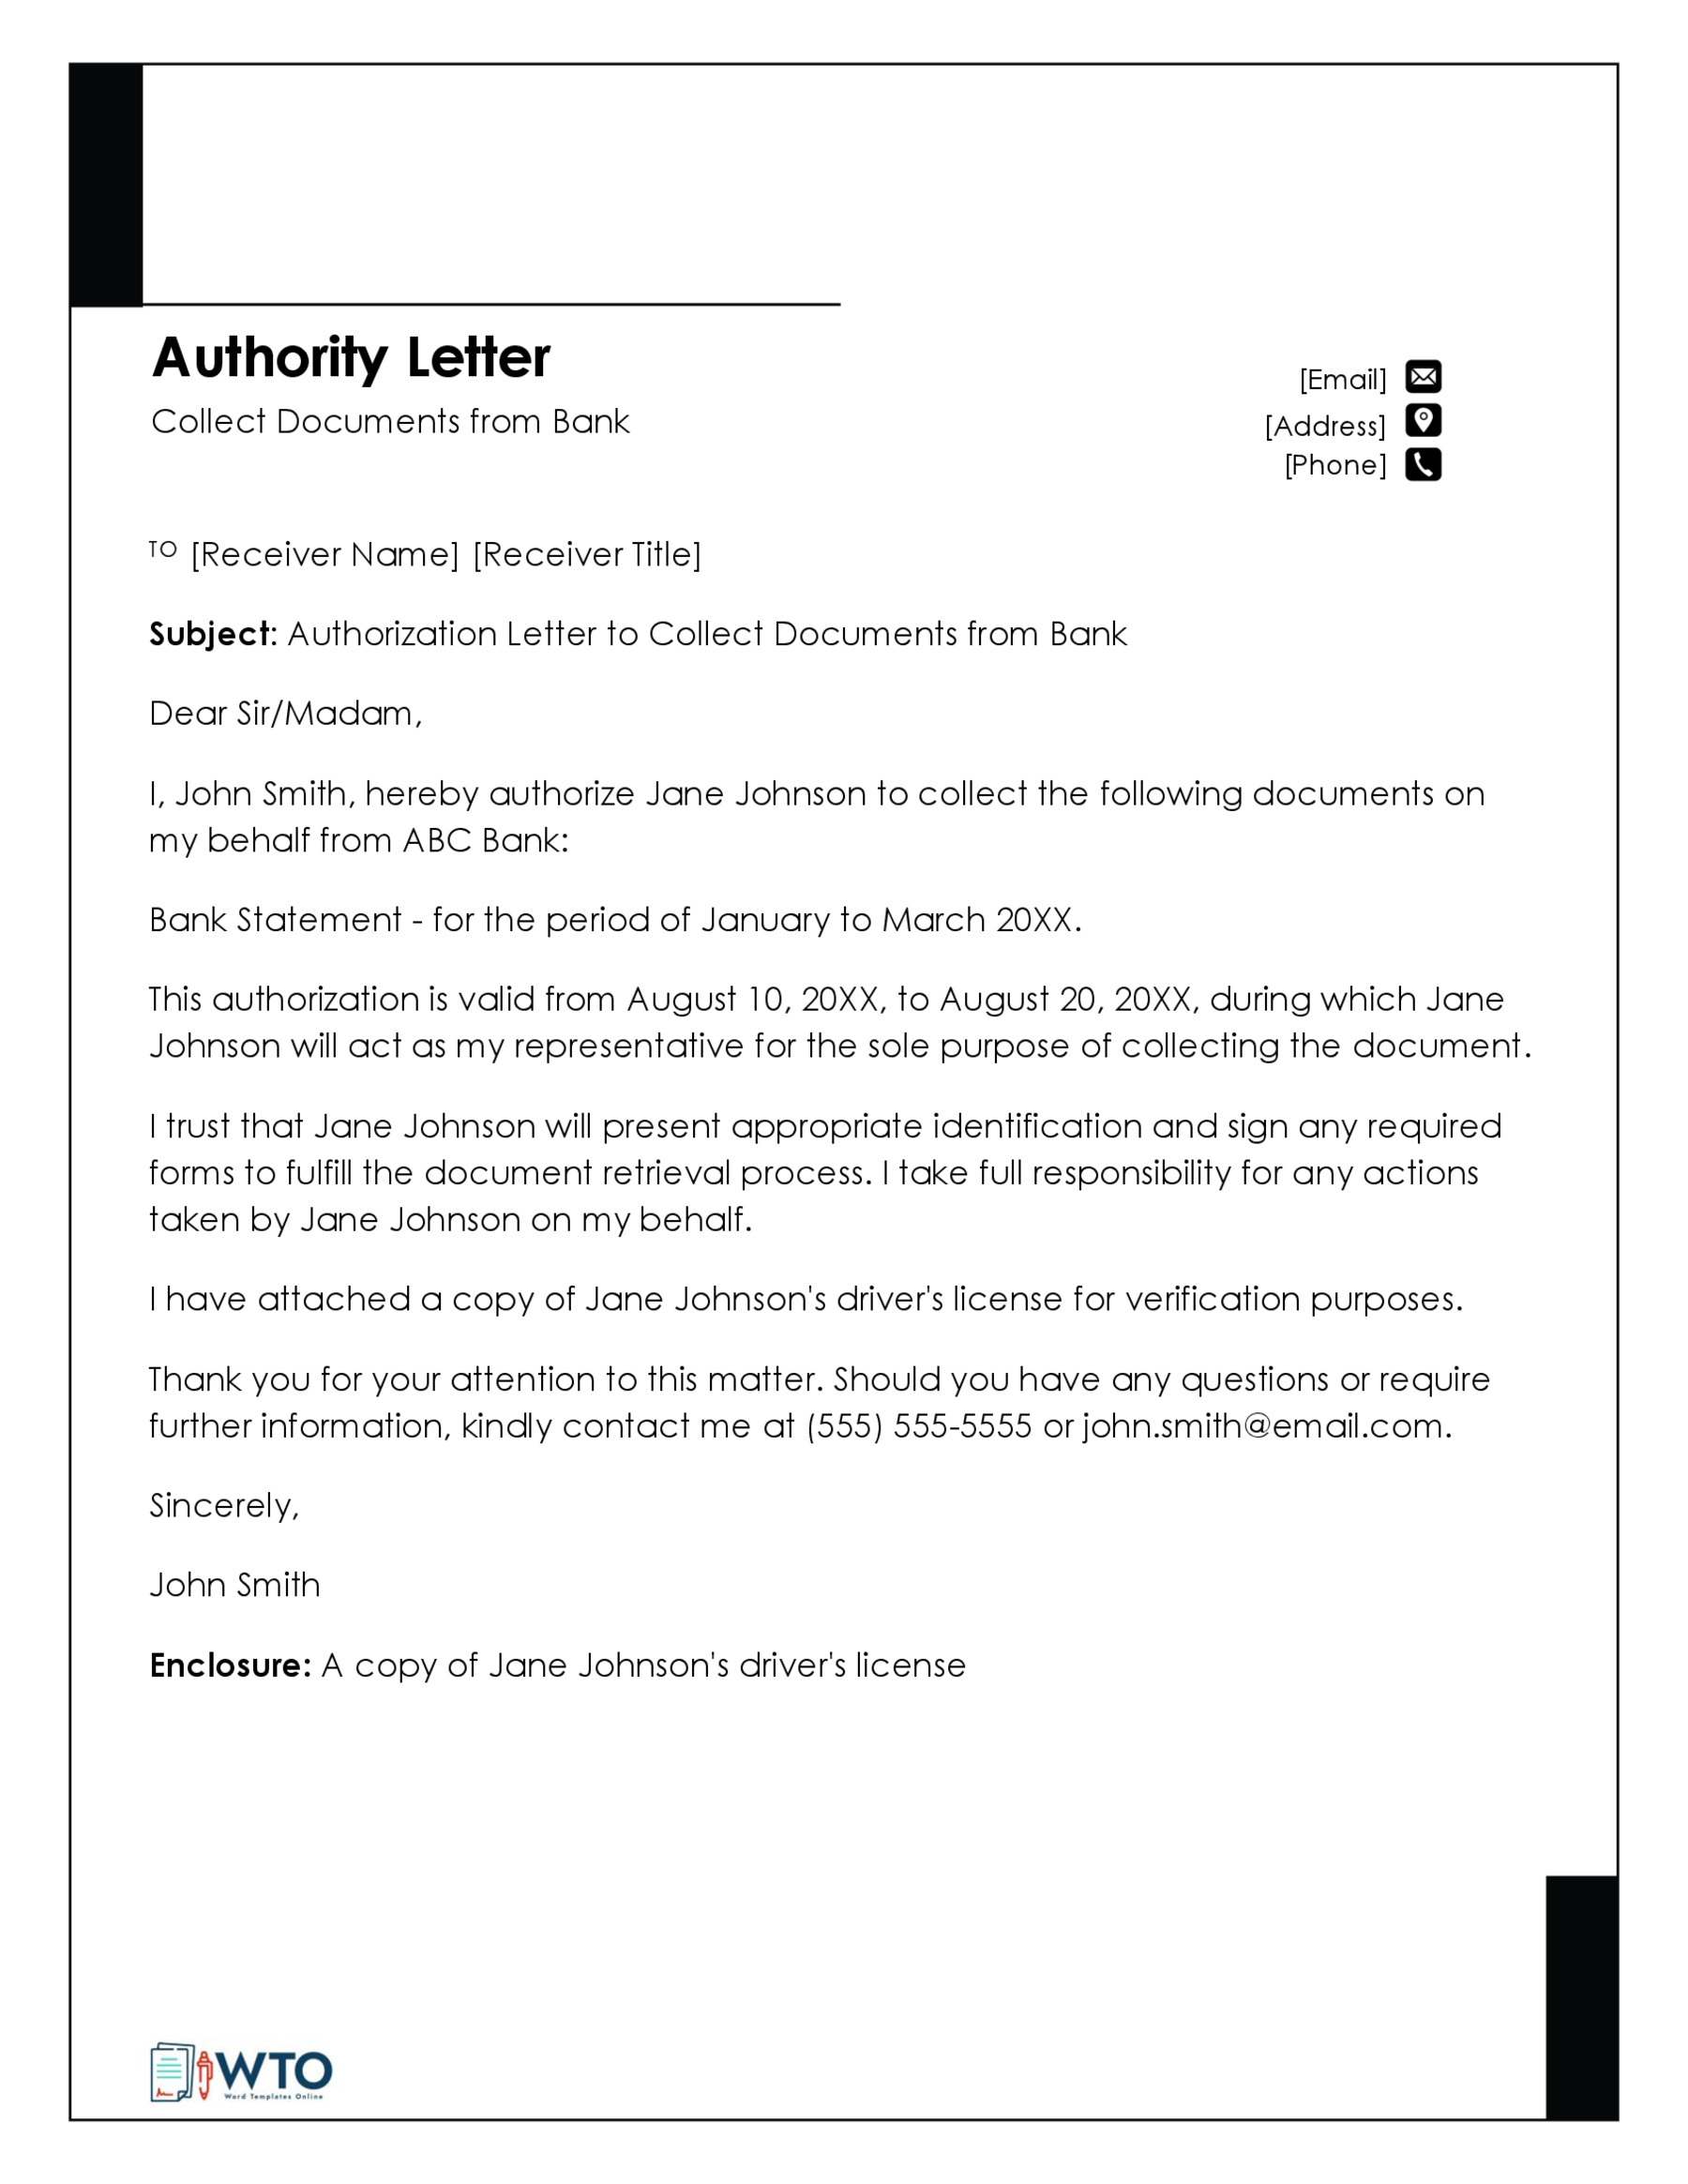 Letter to Collect Documents from Bank Sample-Word Format Free download